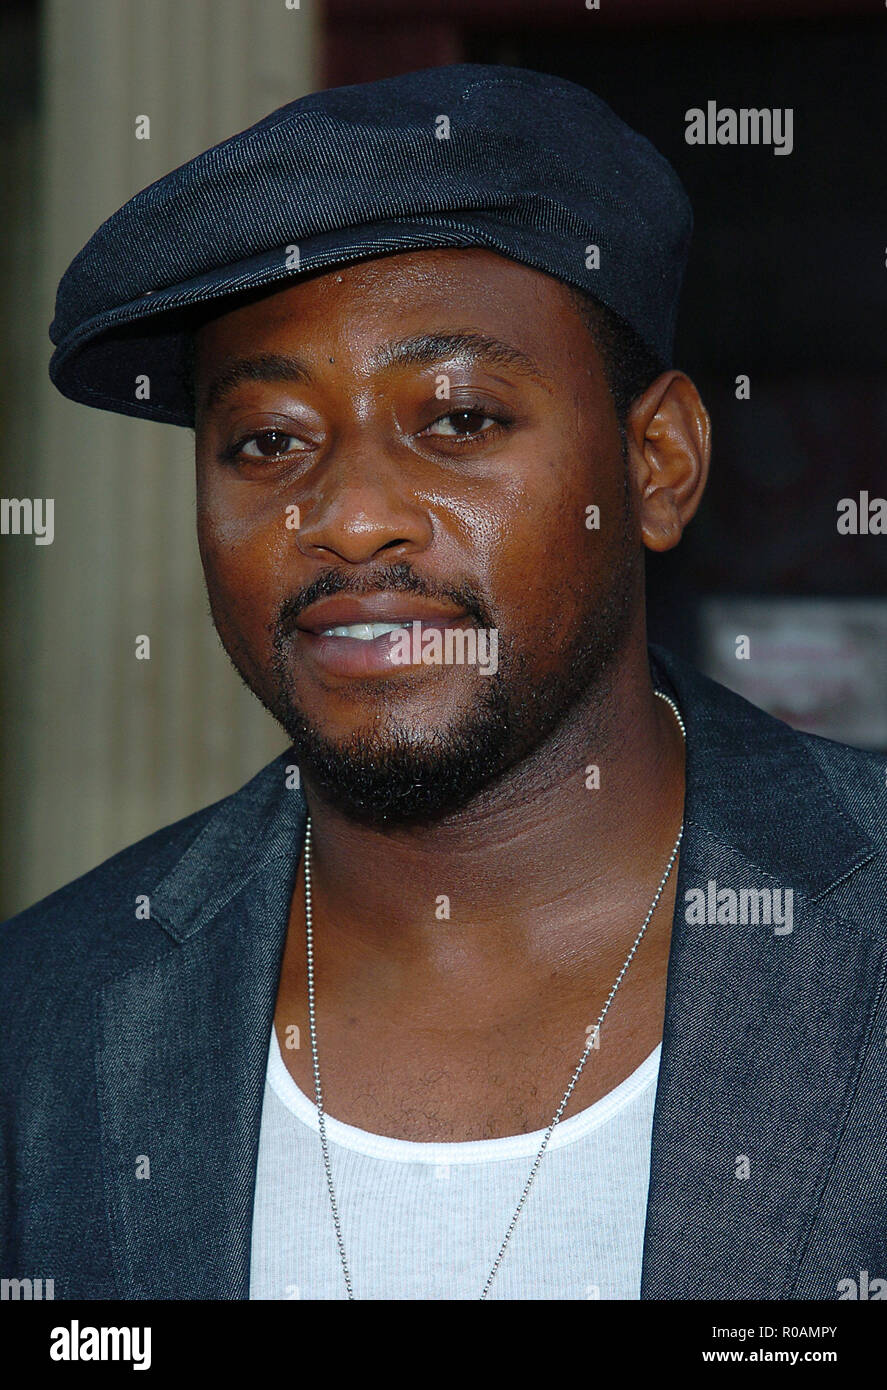 Omar Epps (House) arriving at the 2004 Summer tca Fox All-Star Party on the Fox Lot in Los Angeles. July 16, 2004. EppsOmar House081 Red Carpet Event, Vertical, USA, Film Industry, Celebrities,  Photography, Bestof, Arts Culture and Entertainment, Topix Celebrities fashion /  Vertical, Best of, Event in Hollywood Life - California,  Red Carpet and backstage, USA, Film Industry, Celebrities,  movie celebrities, TV celebrities, Music celebrities, Photography, Bestof, Arts Culture and Entertainment,  Topix, headshot, vertical, one person,, from the year , 2004, inquiry tsuni@Gamma-USA.com Stock Photo